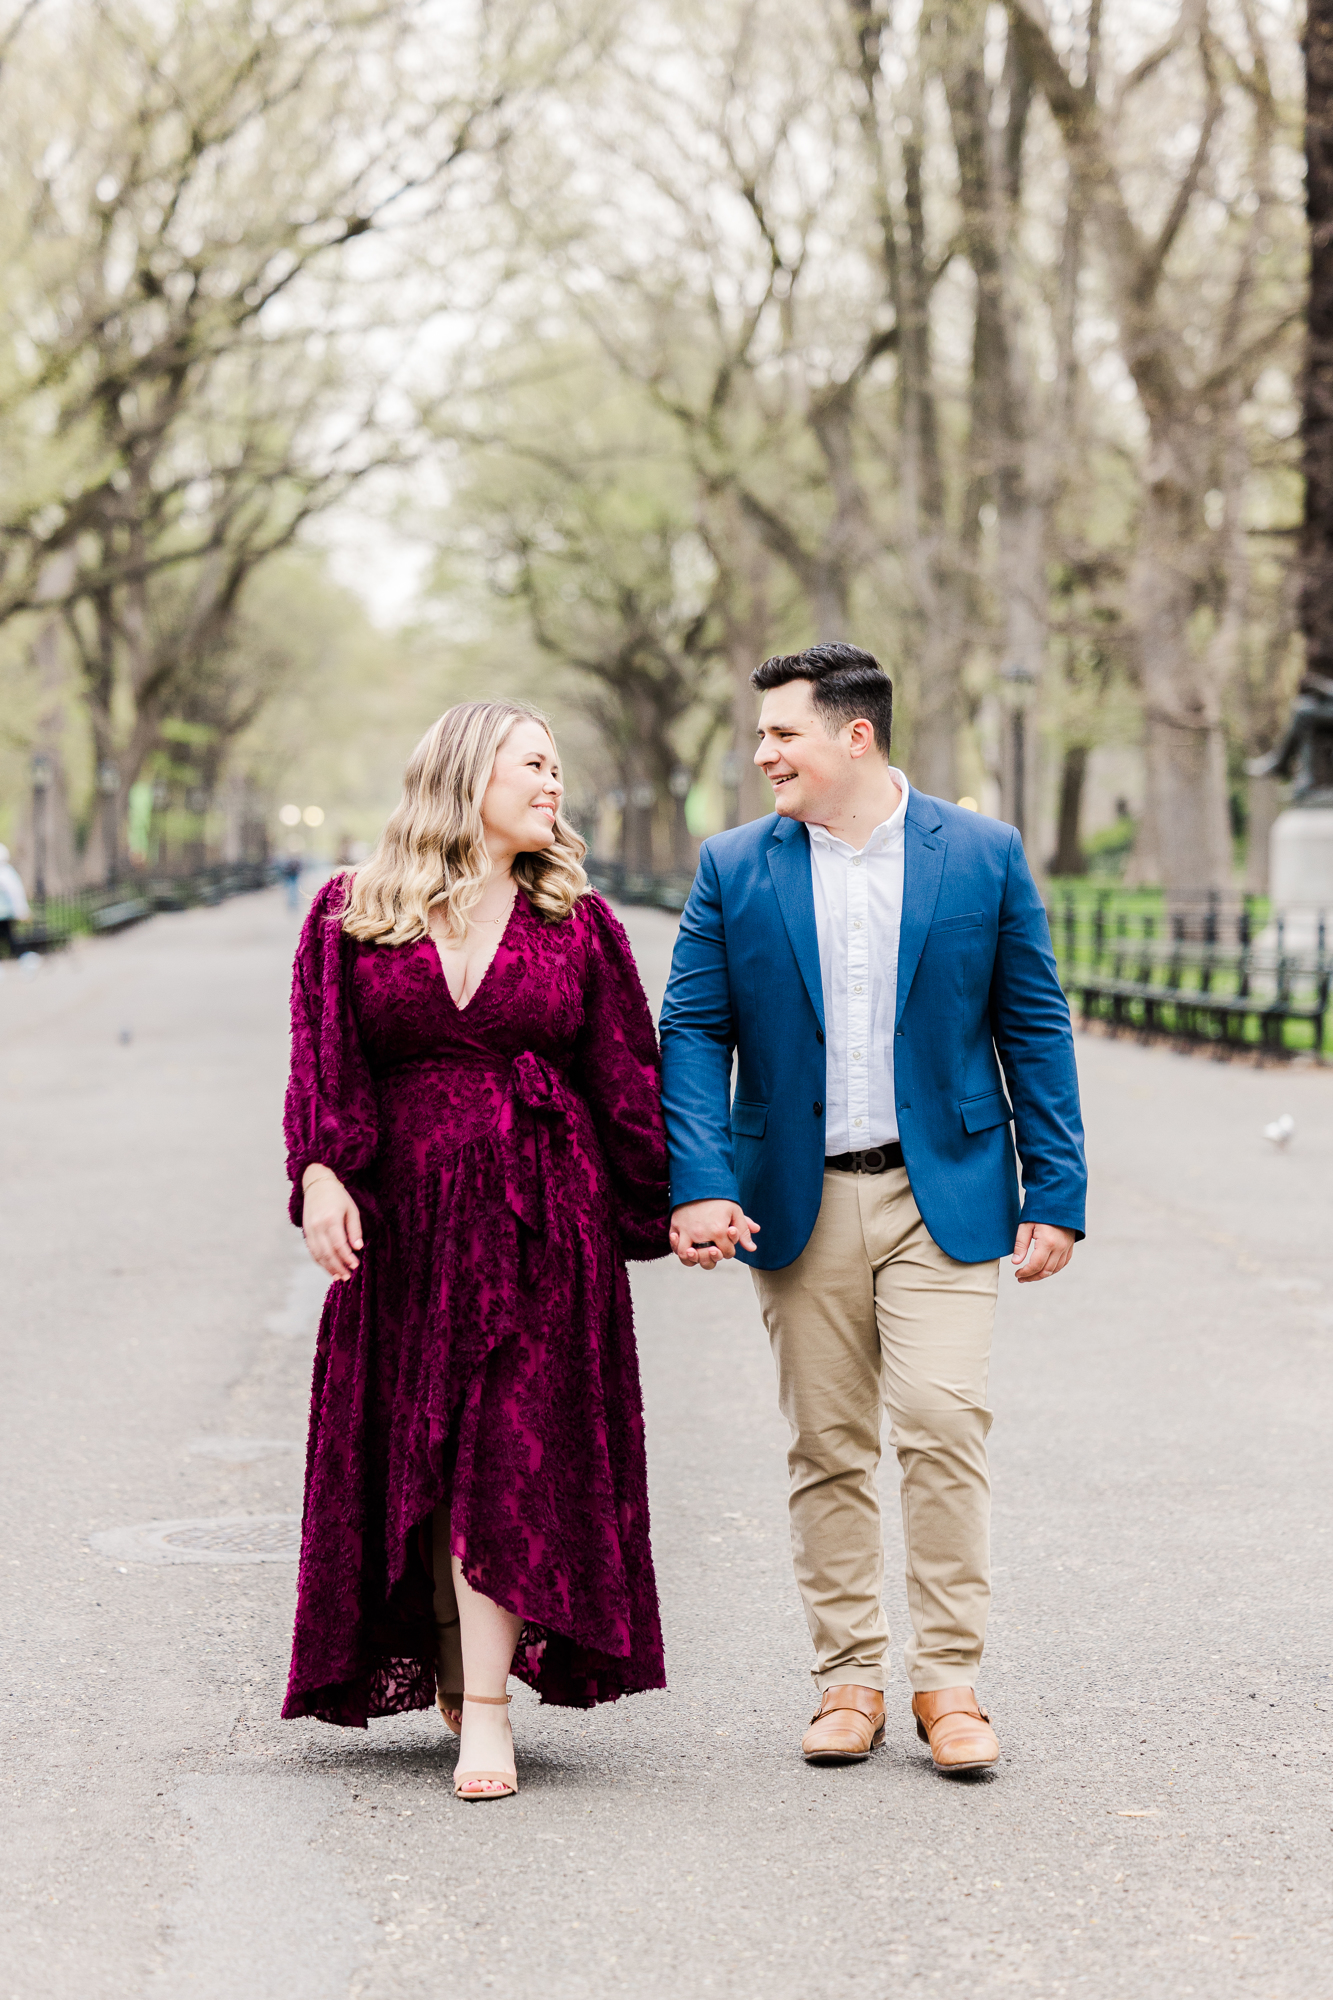 Striking Engagement Pictures in Central Park